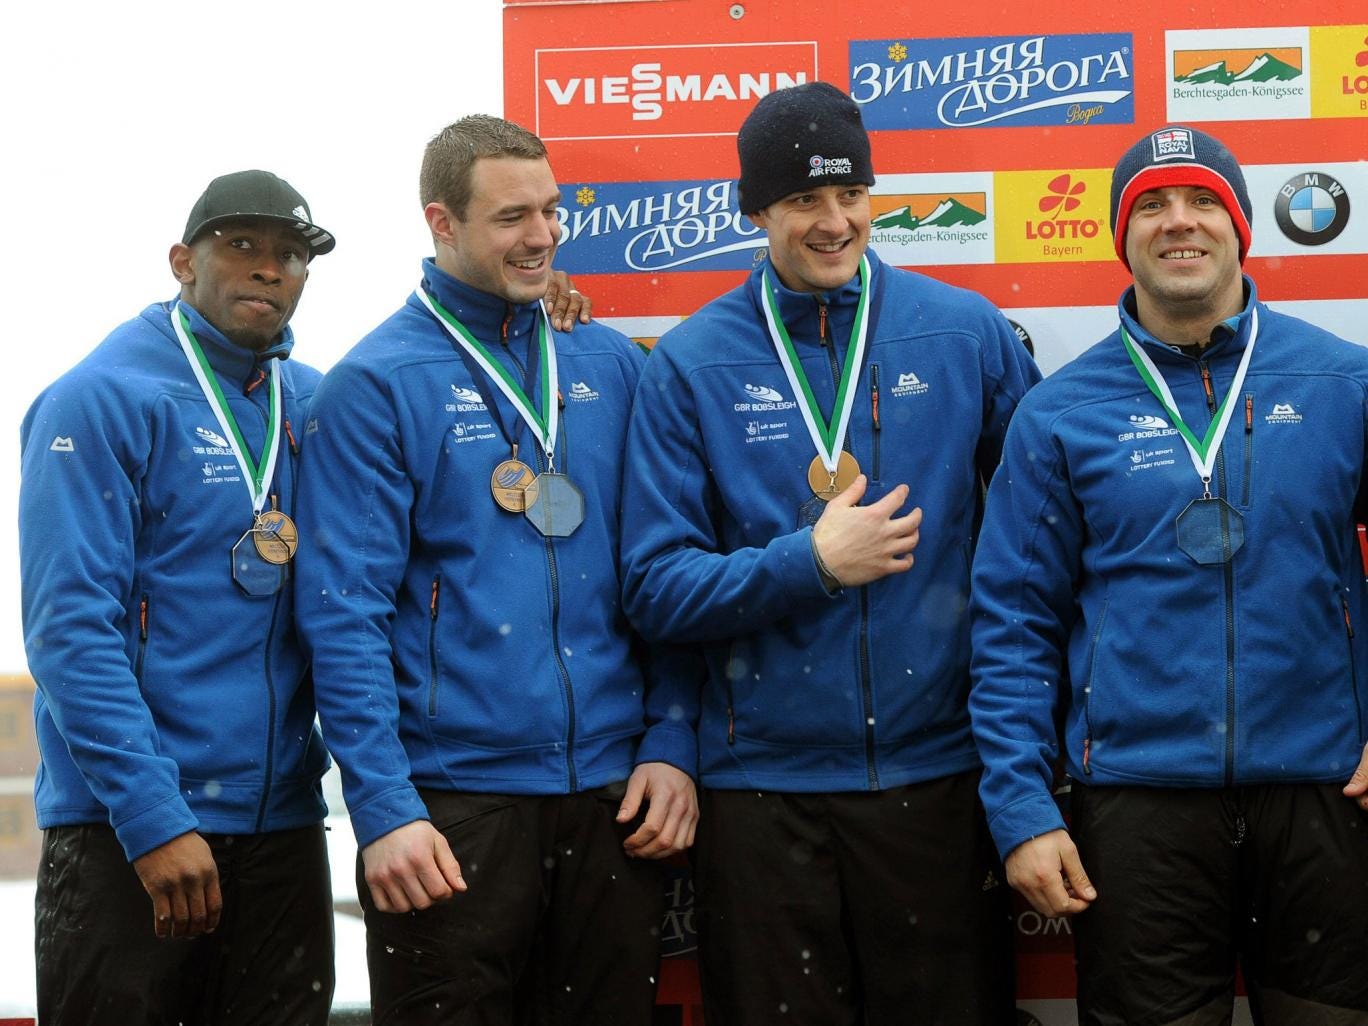 Winter Olympics 2014 GB bobsleigh team raises Sochi expectations with